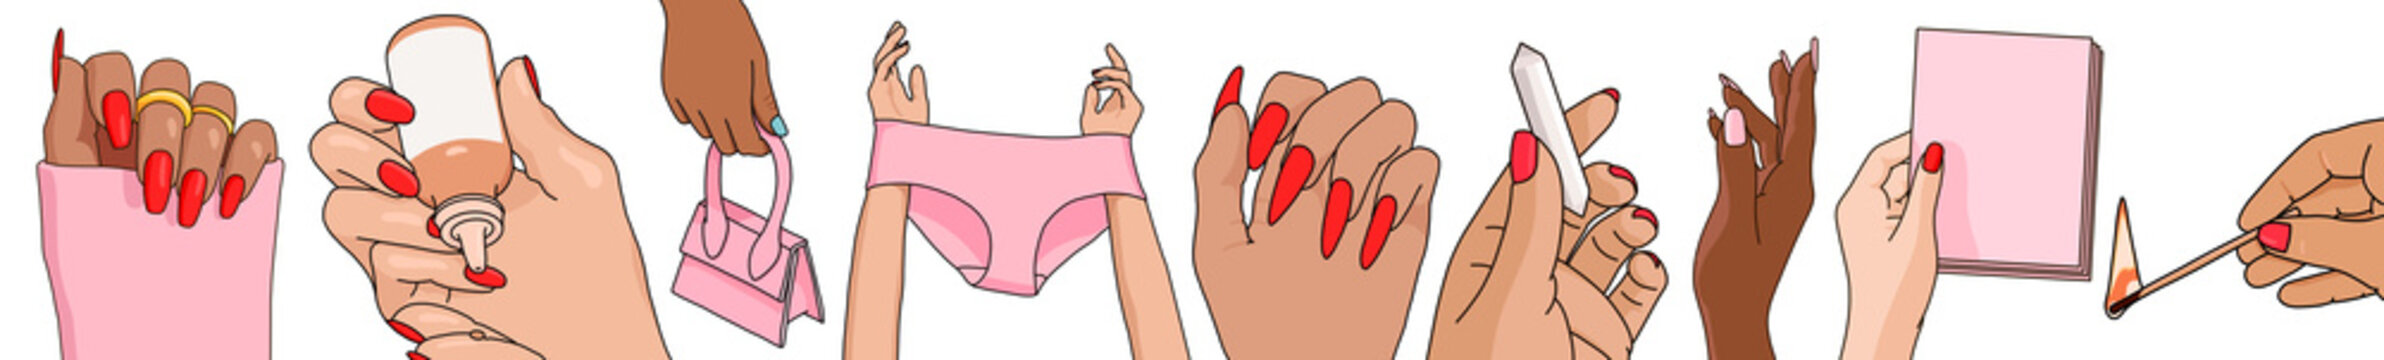 Illustration of women hands, different skin colors and nails shape, holding items